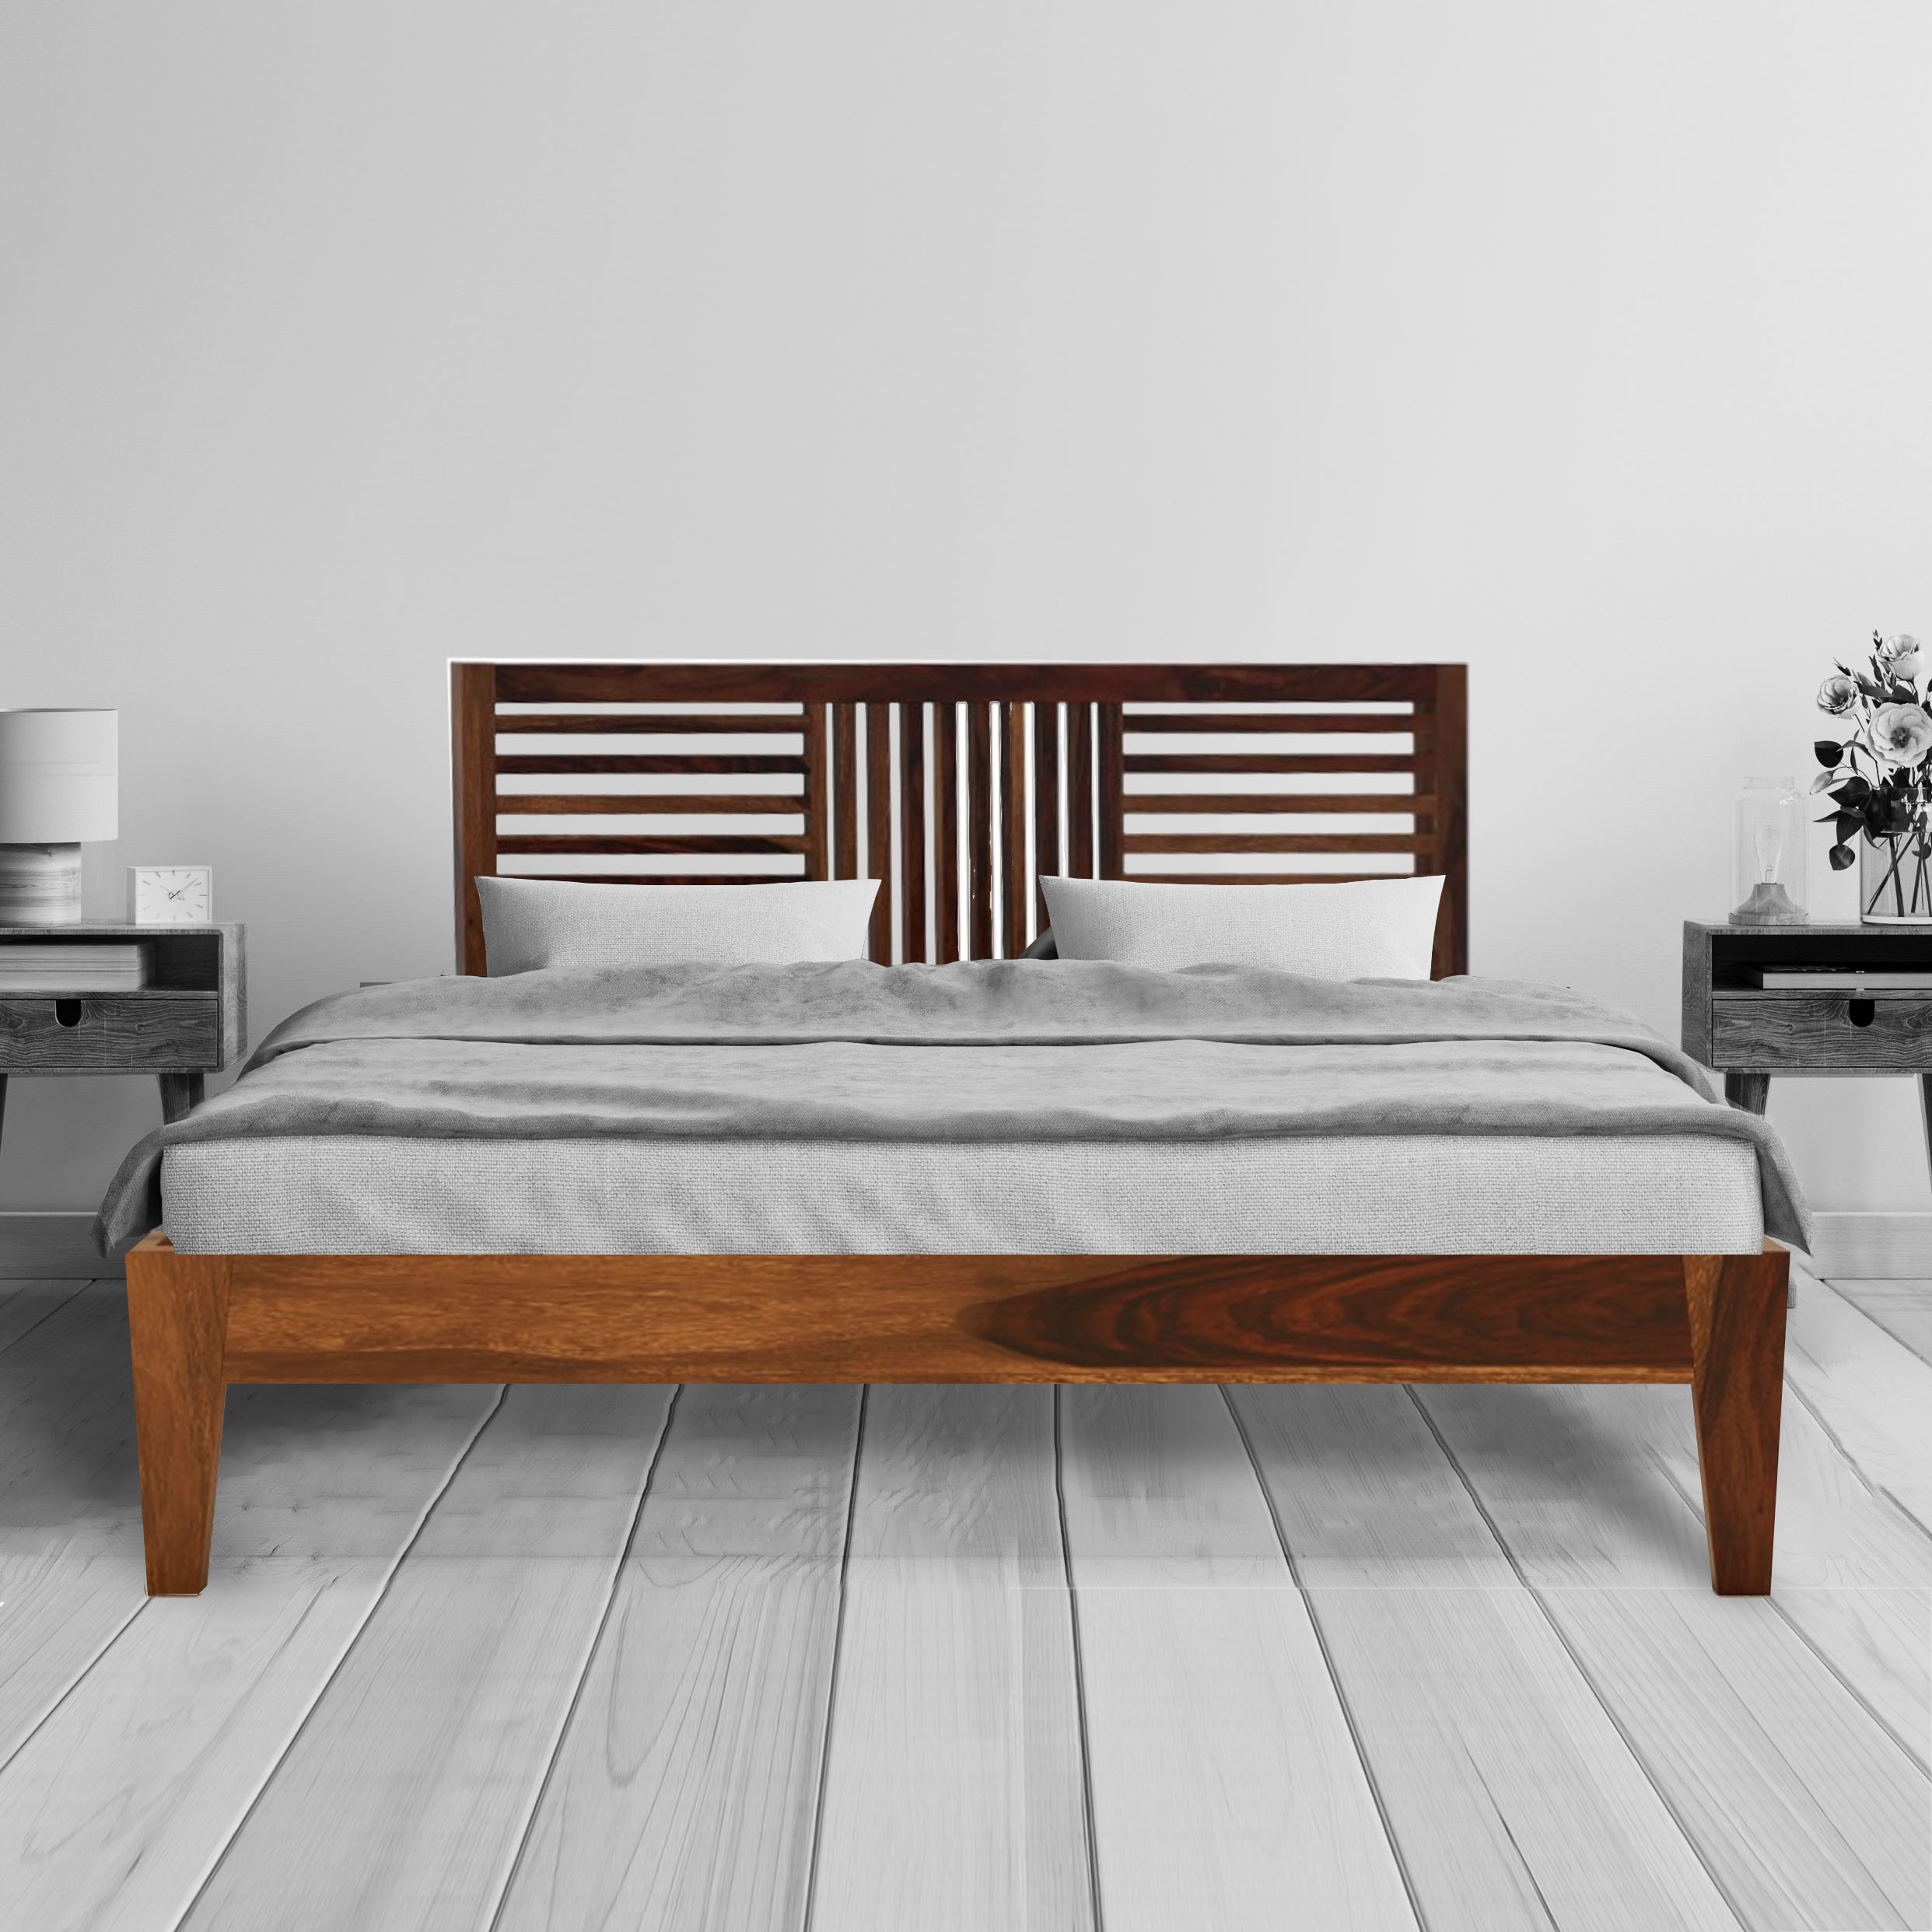 Aura solid wood queen size walnut finish bed